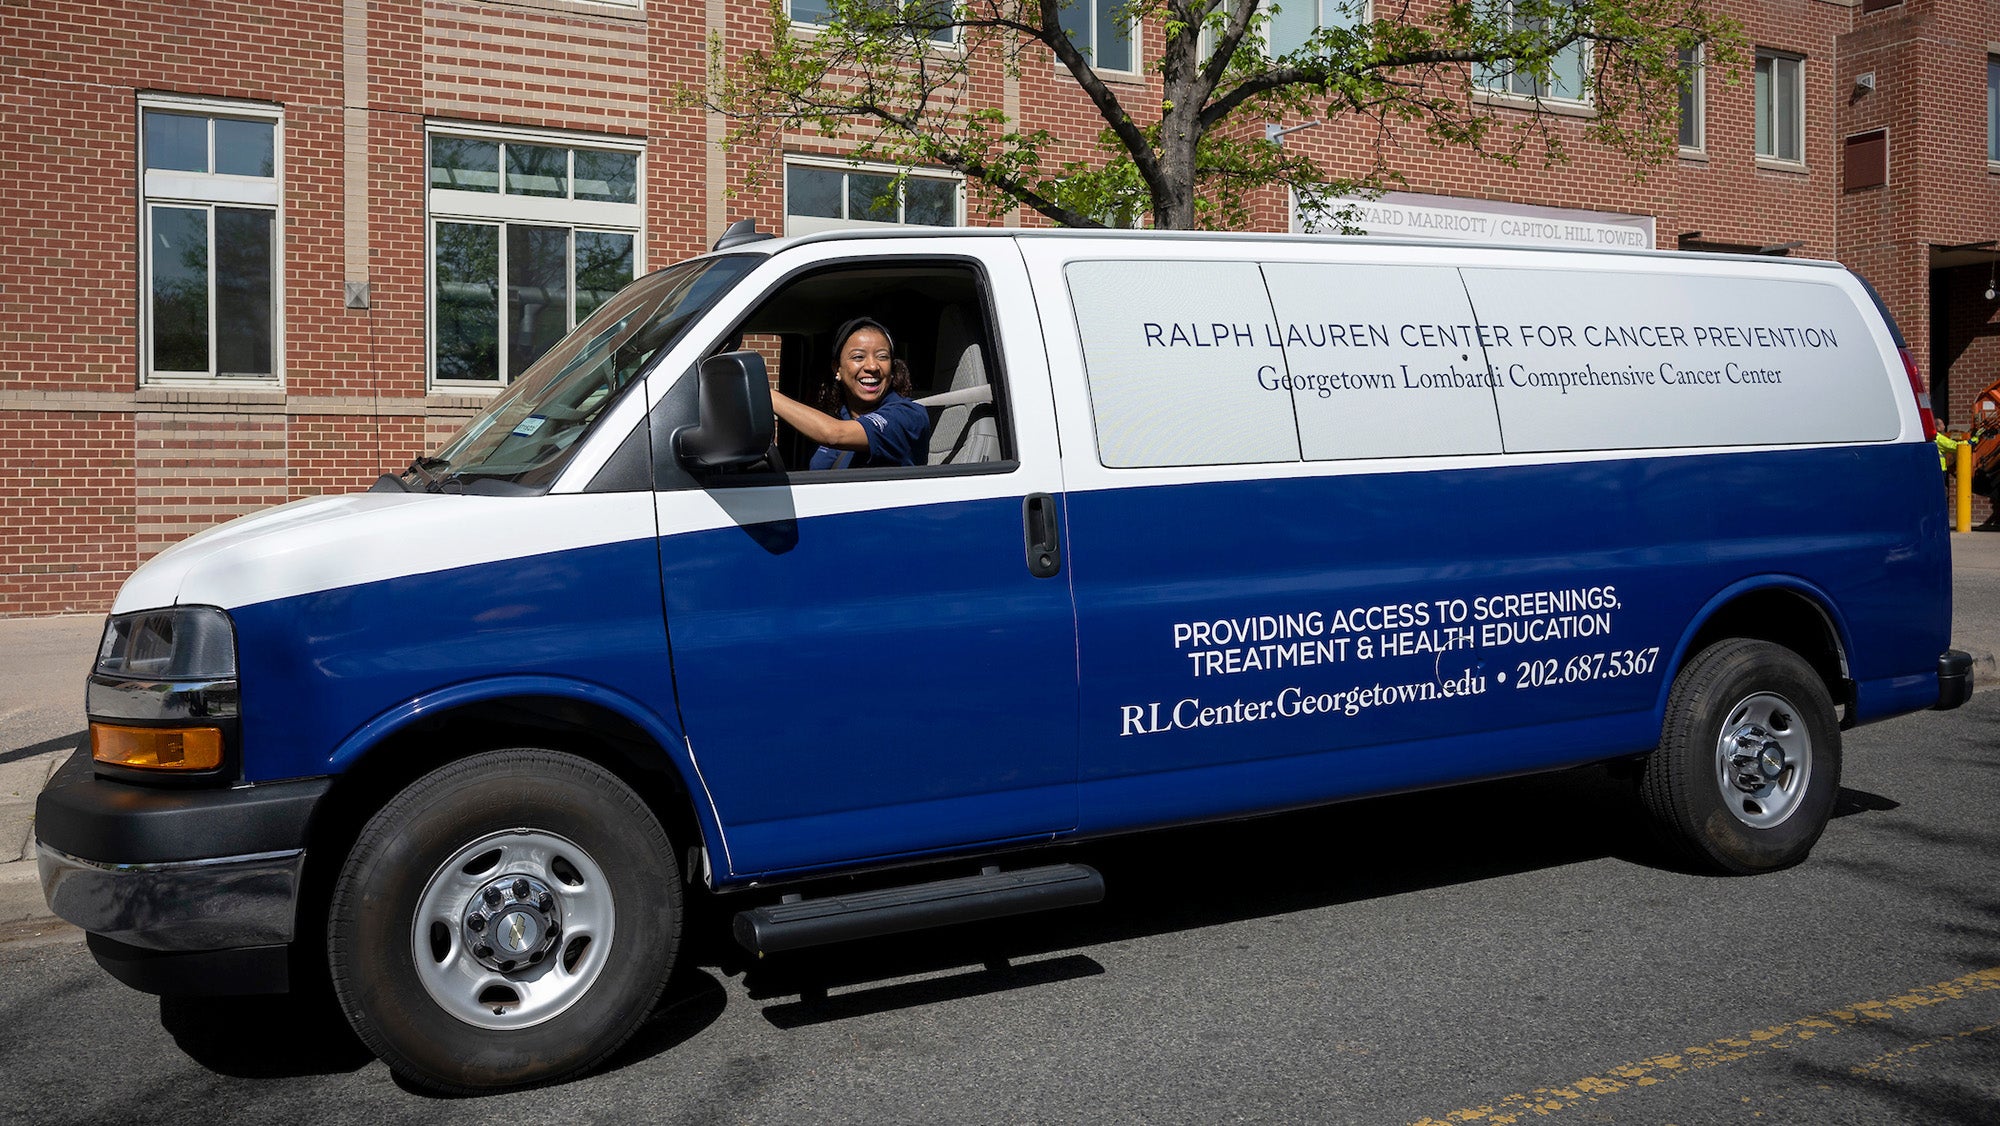 A woman drives a 12-passenger van displaying the logo of the Ralph Lauren Center for Cancer Prevention